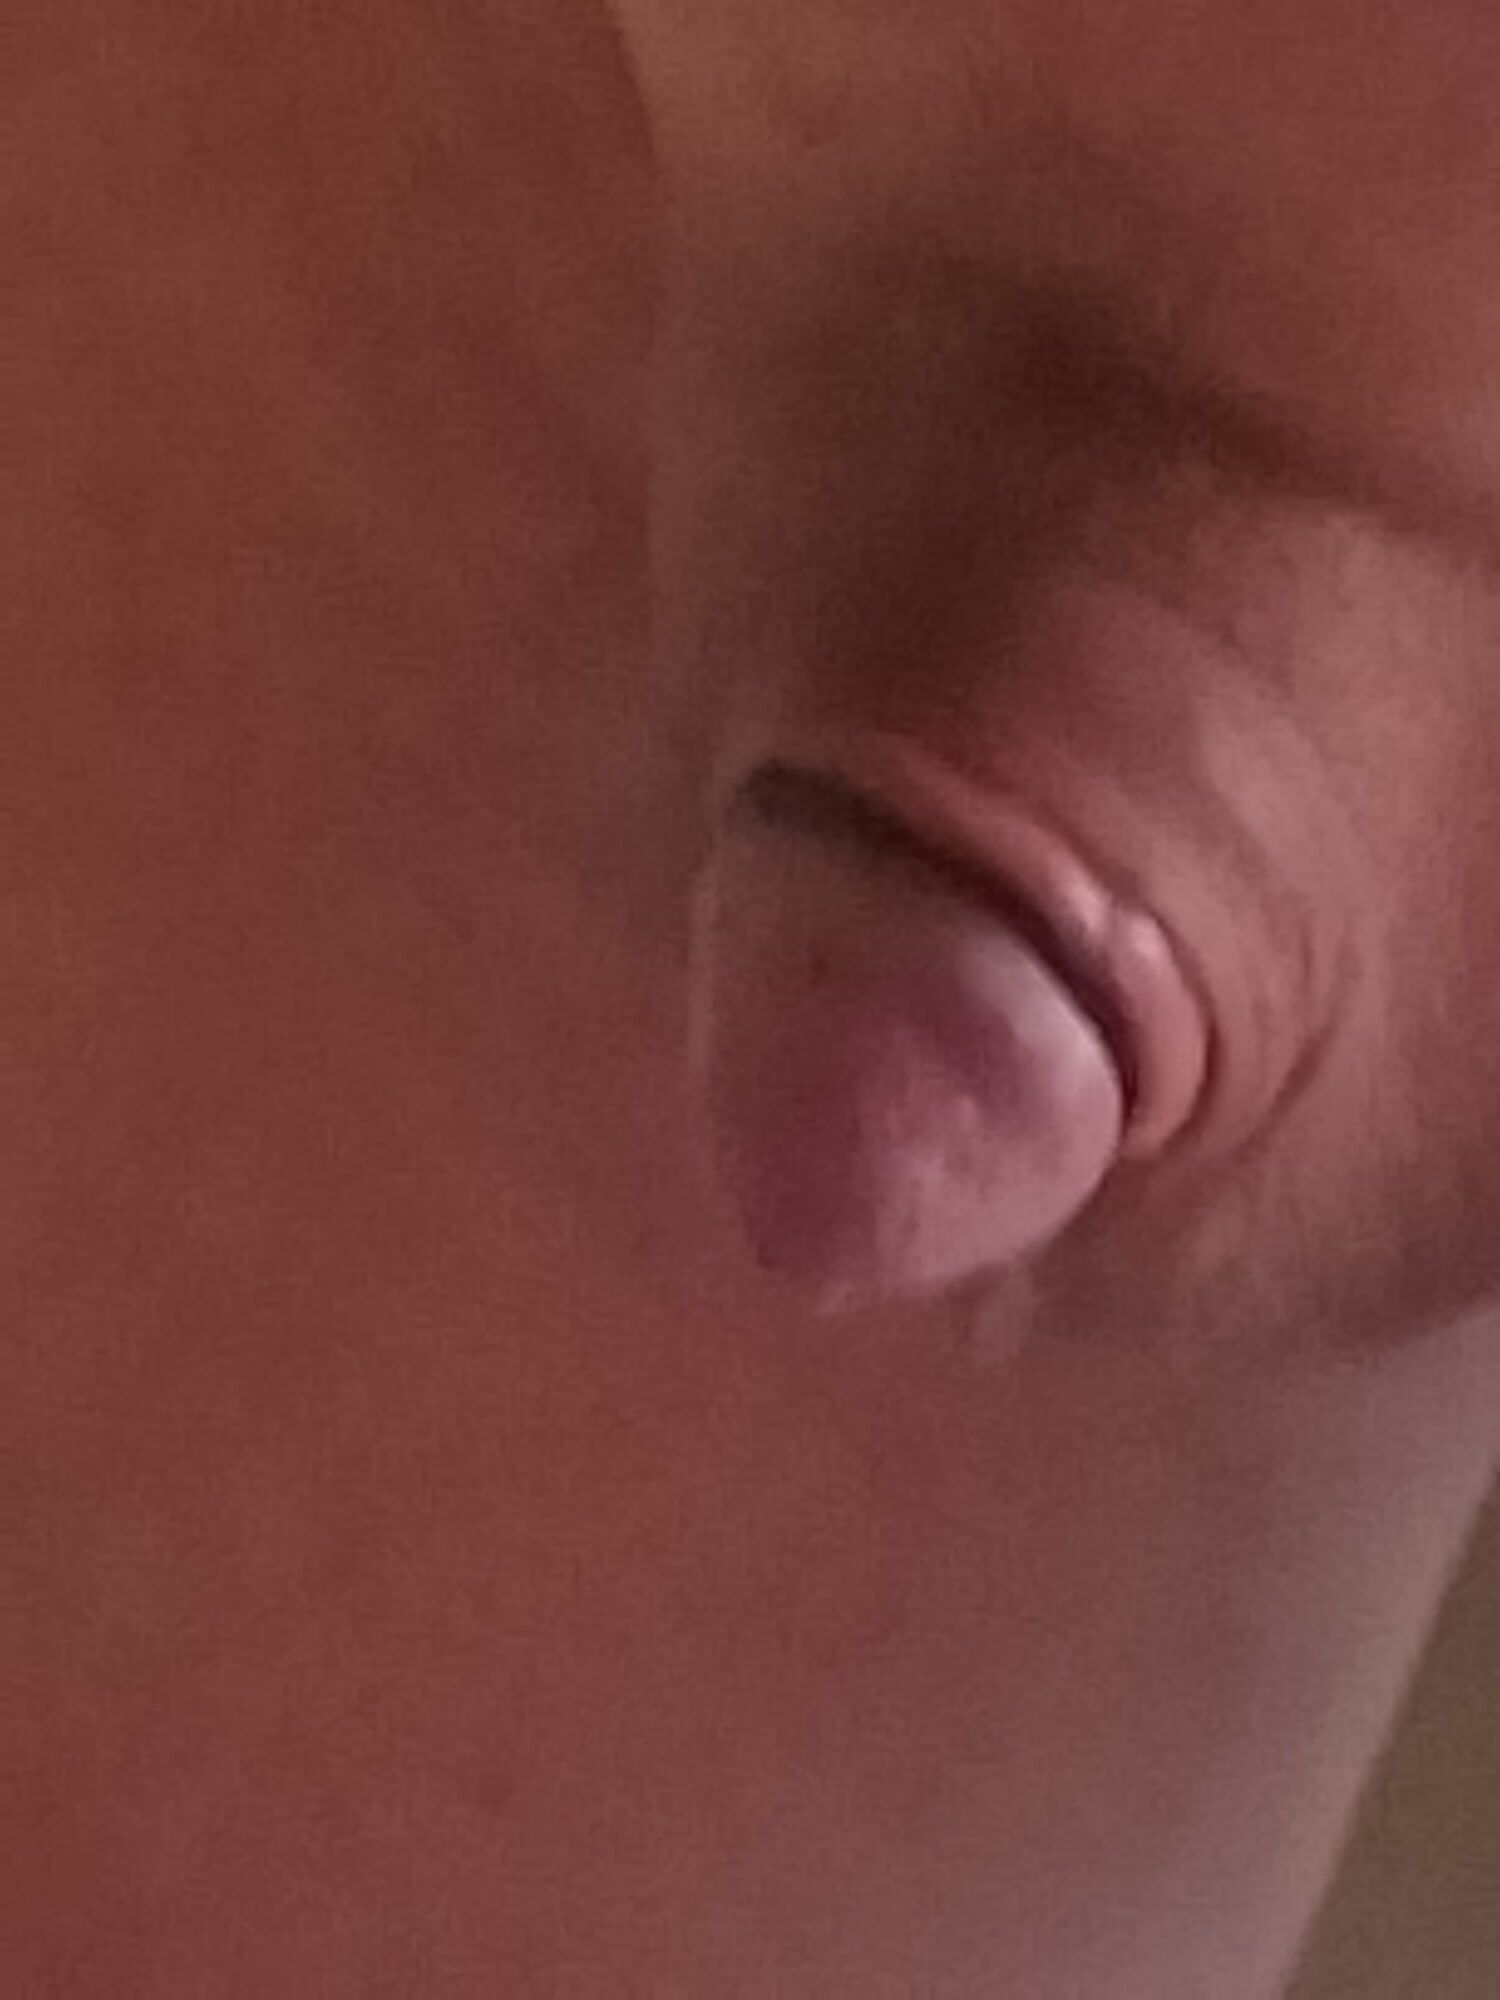 Exposed clitty dripping #9